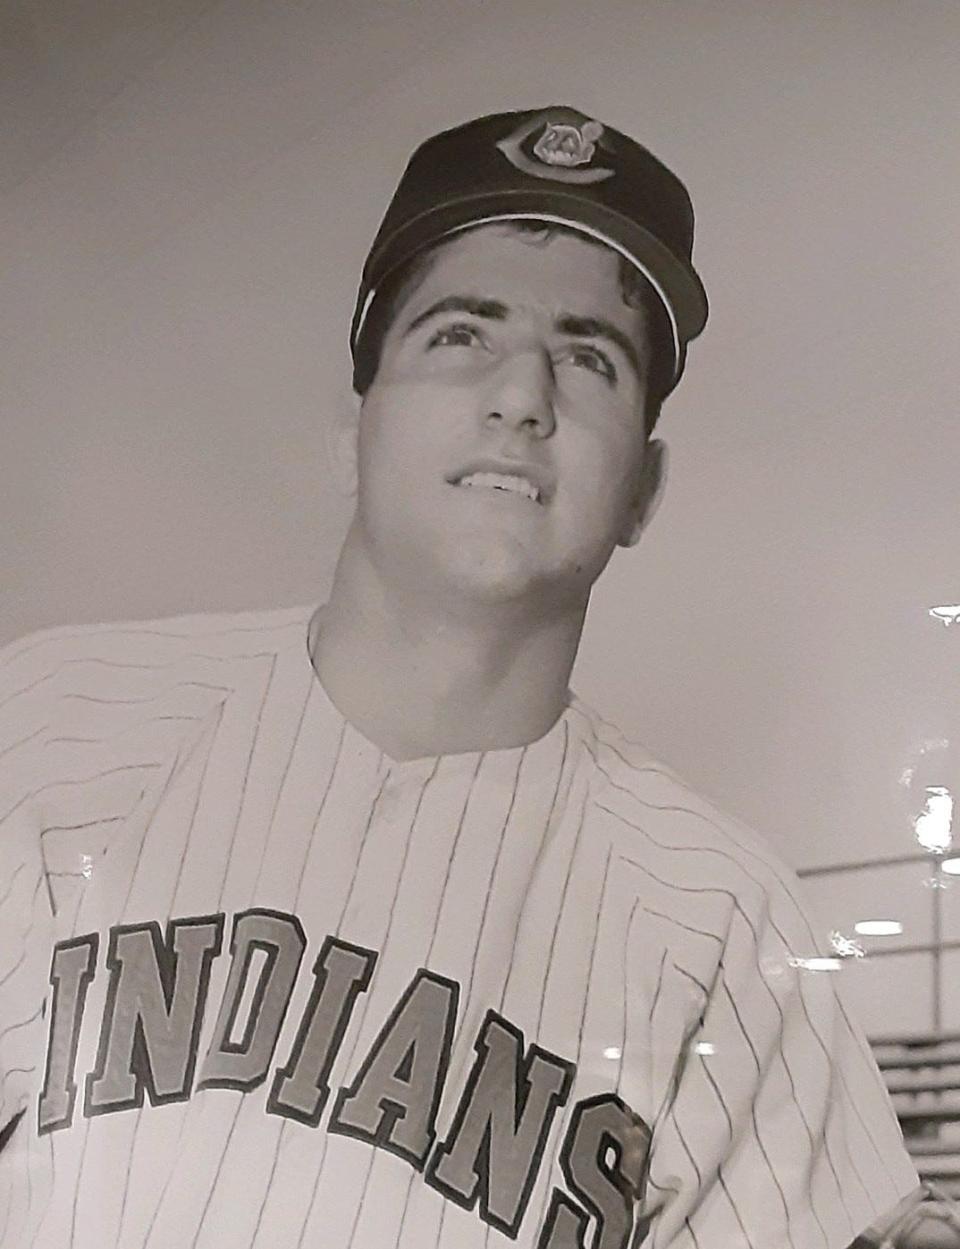 Rockford's Frank DeCastris shortly after signing with the Cleveland Indians organization in 1961.